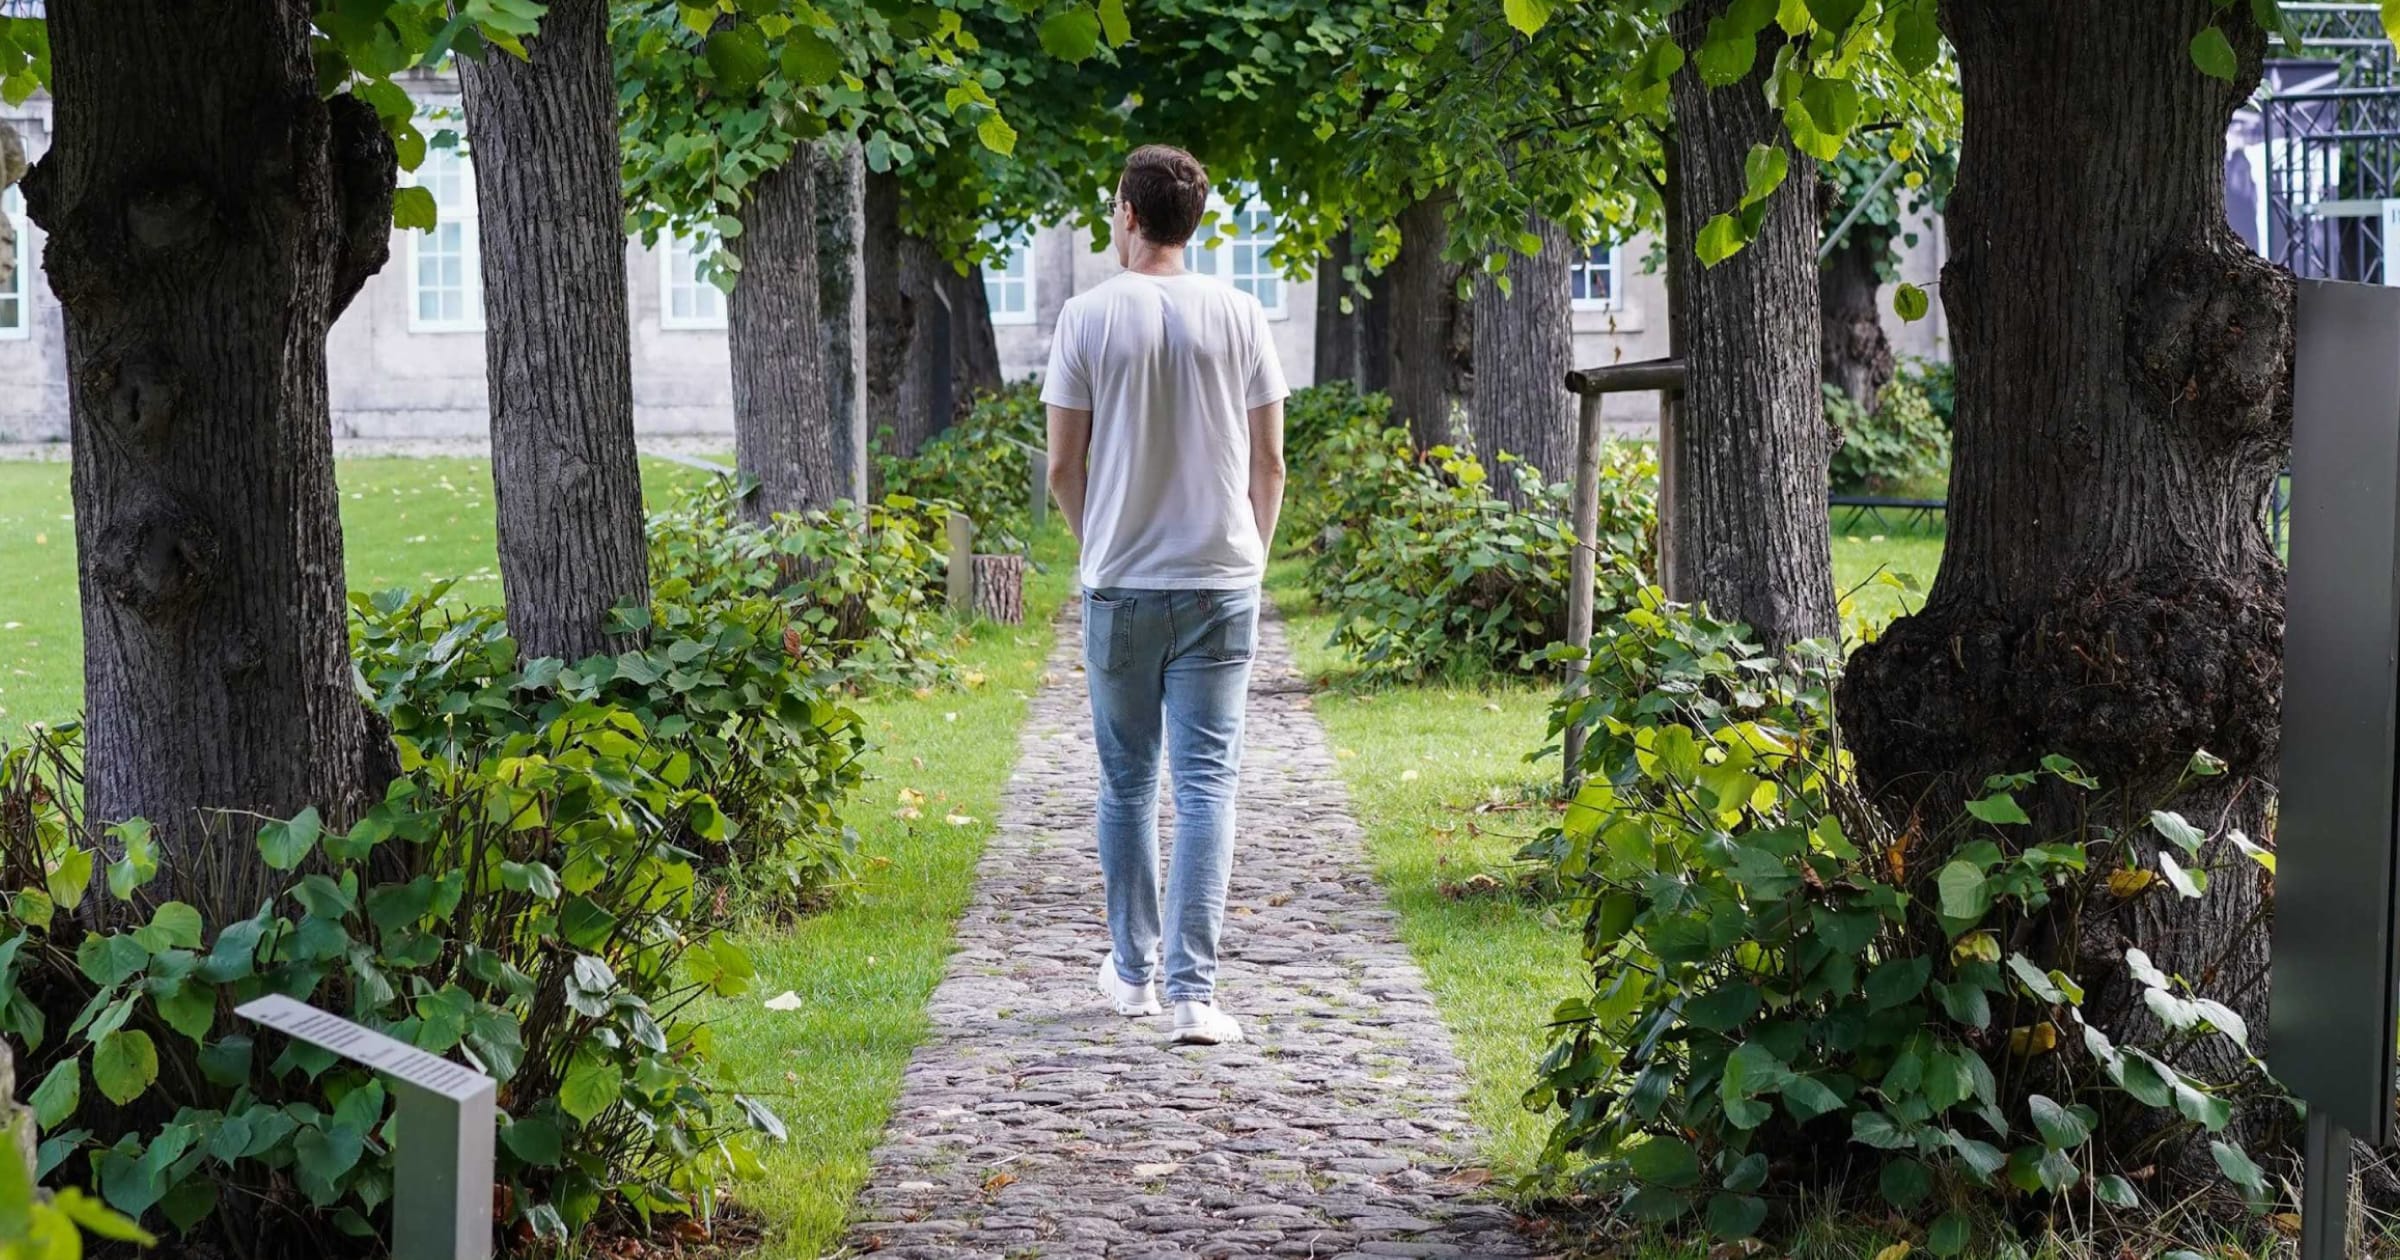 A photo of Gabe walking down a stone path in the courtyard of Designmuseum in Copenhagen. Gabe has his back turned to camera is walking away. He is wearing a white t-shirt, blue jeans, and white athletic shoes.